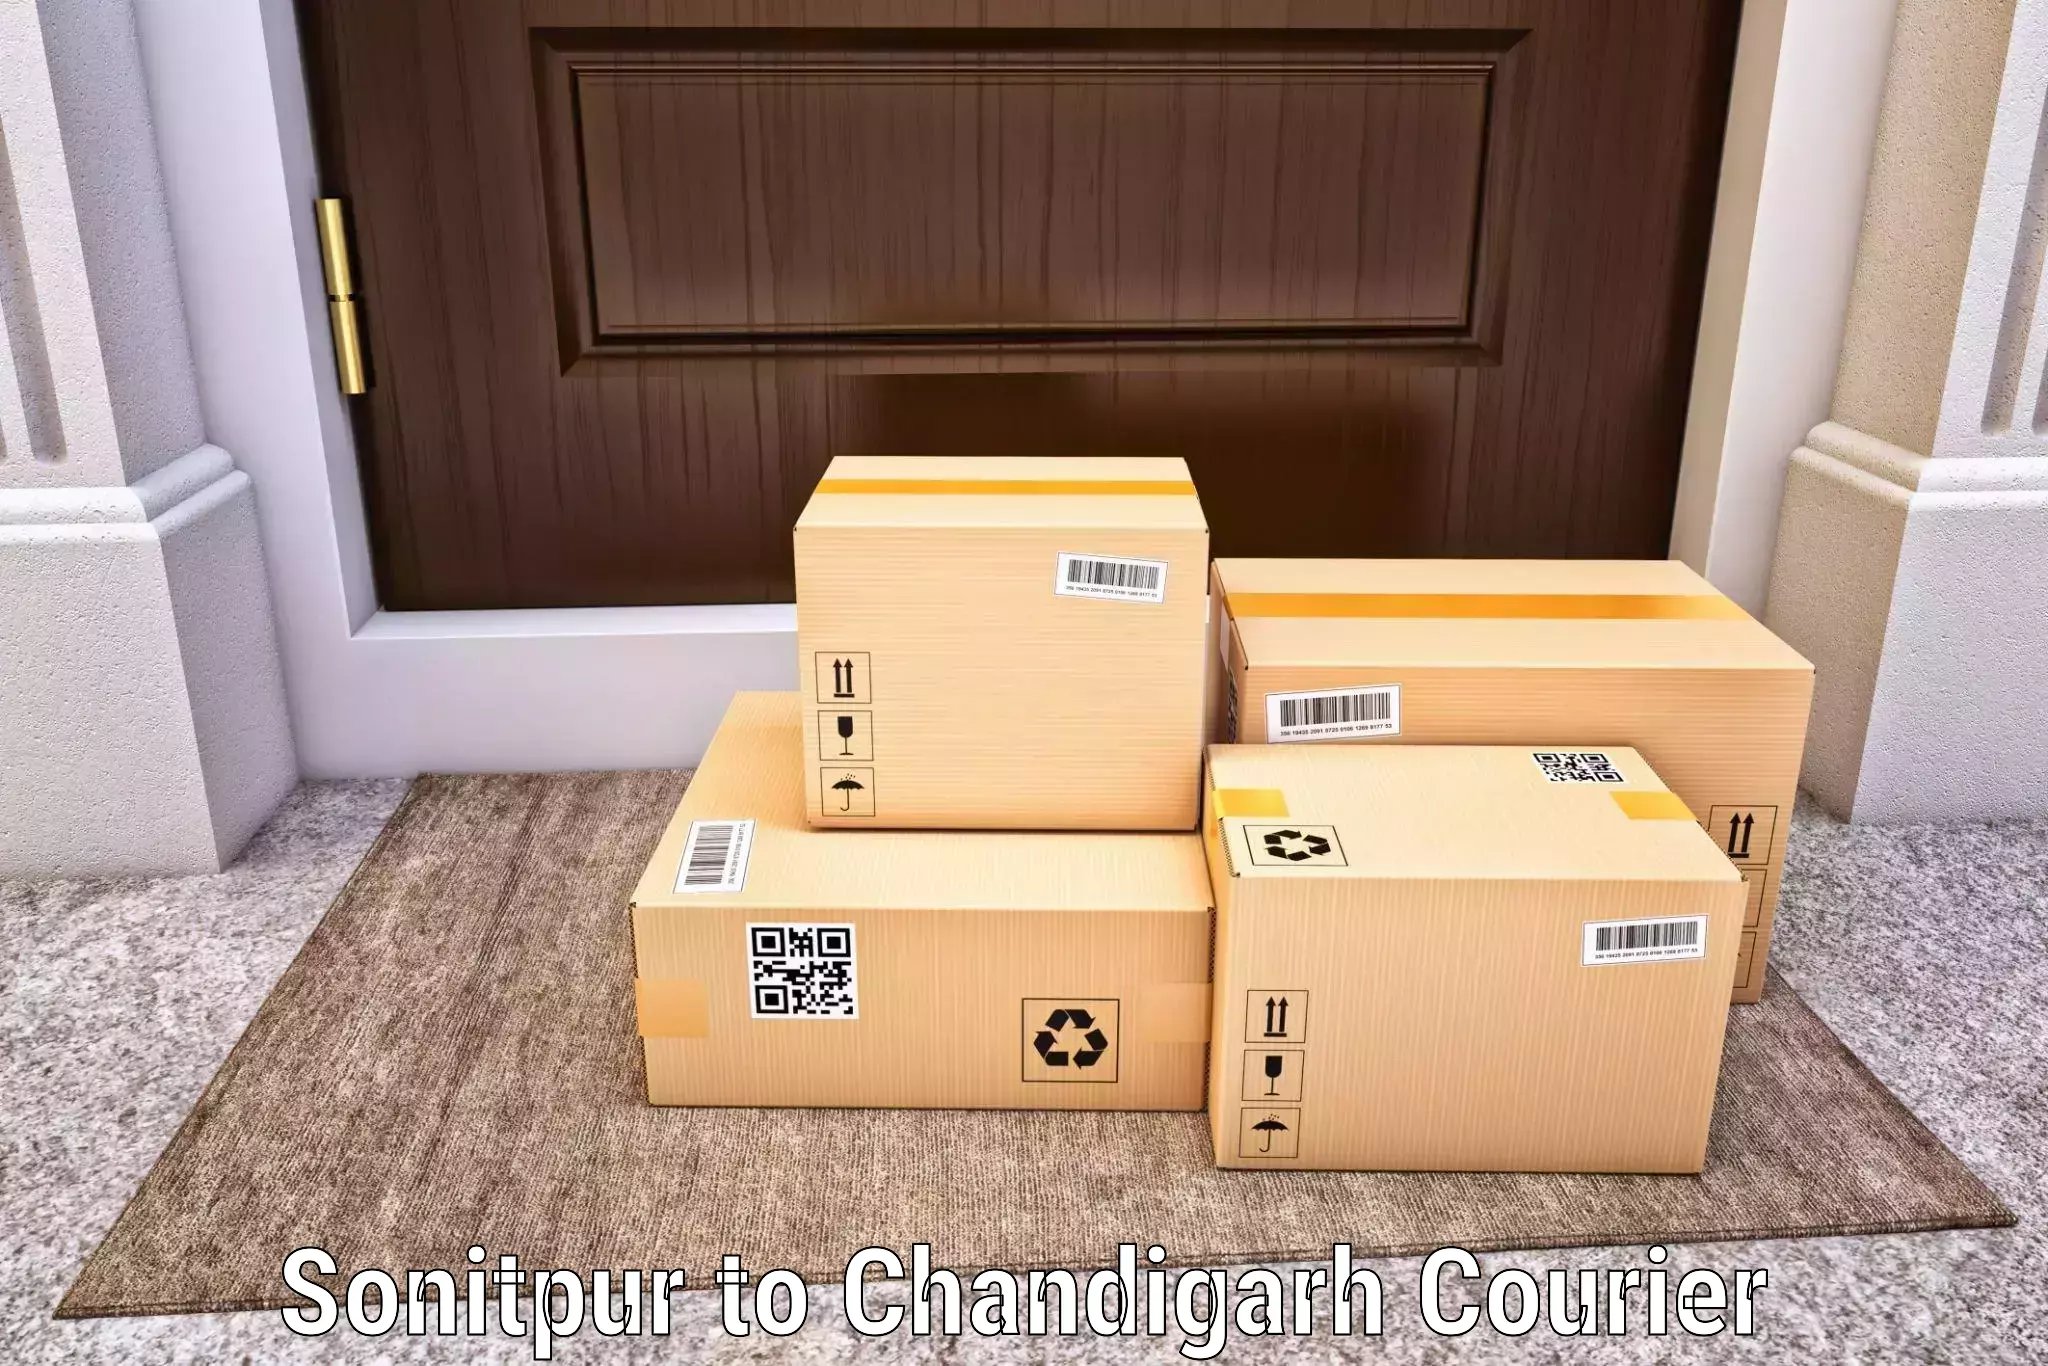 Specialized shipment handling Sonitpur to Chandigarh